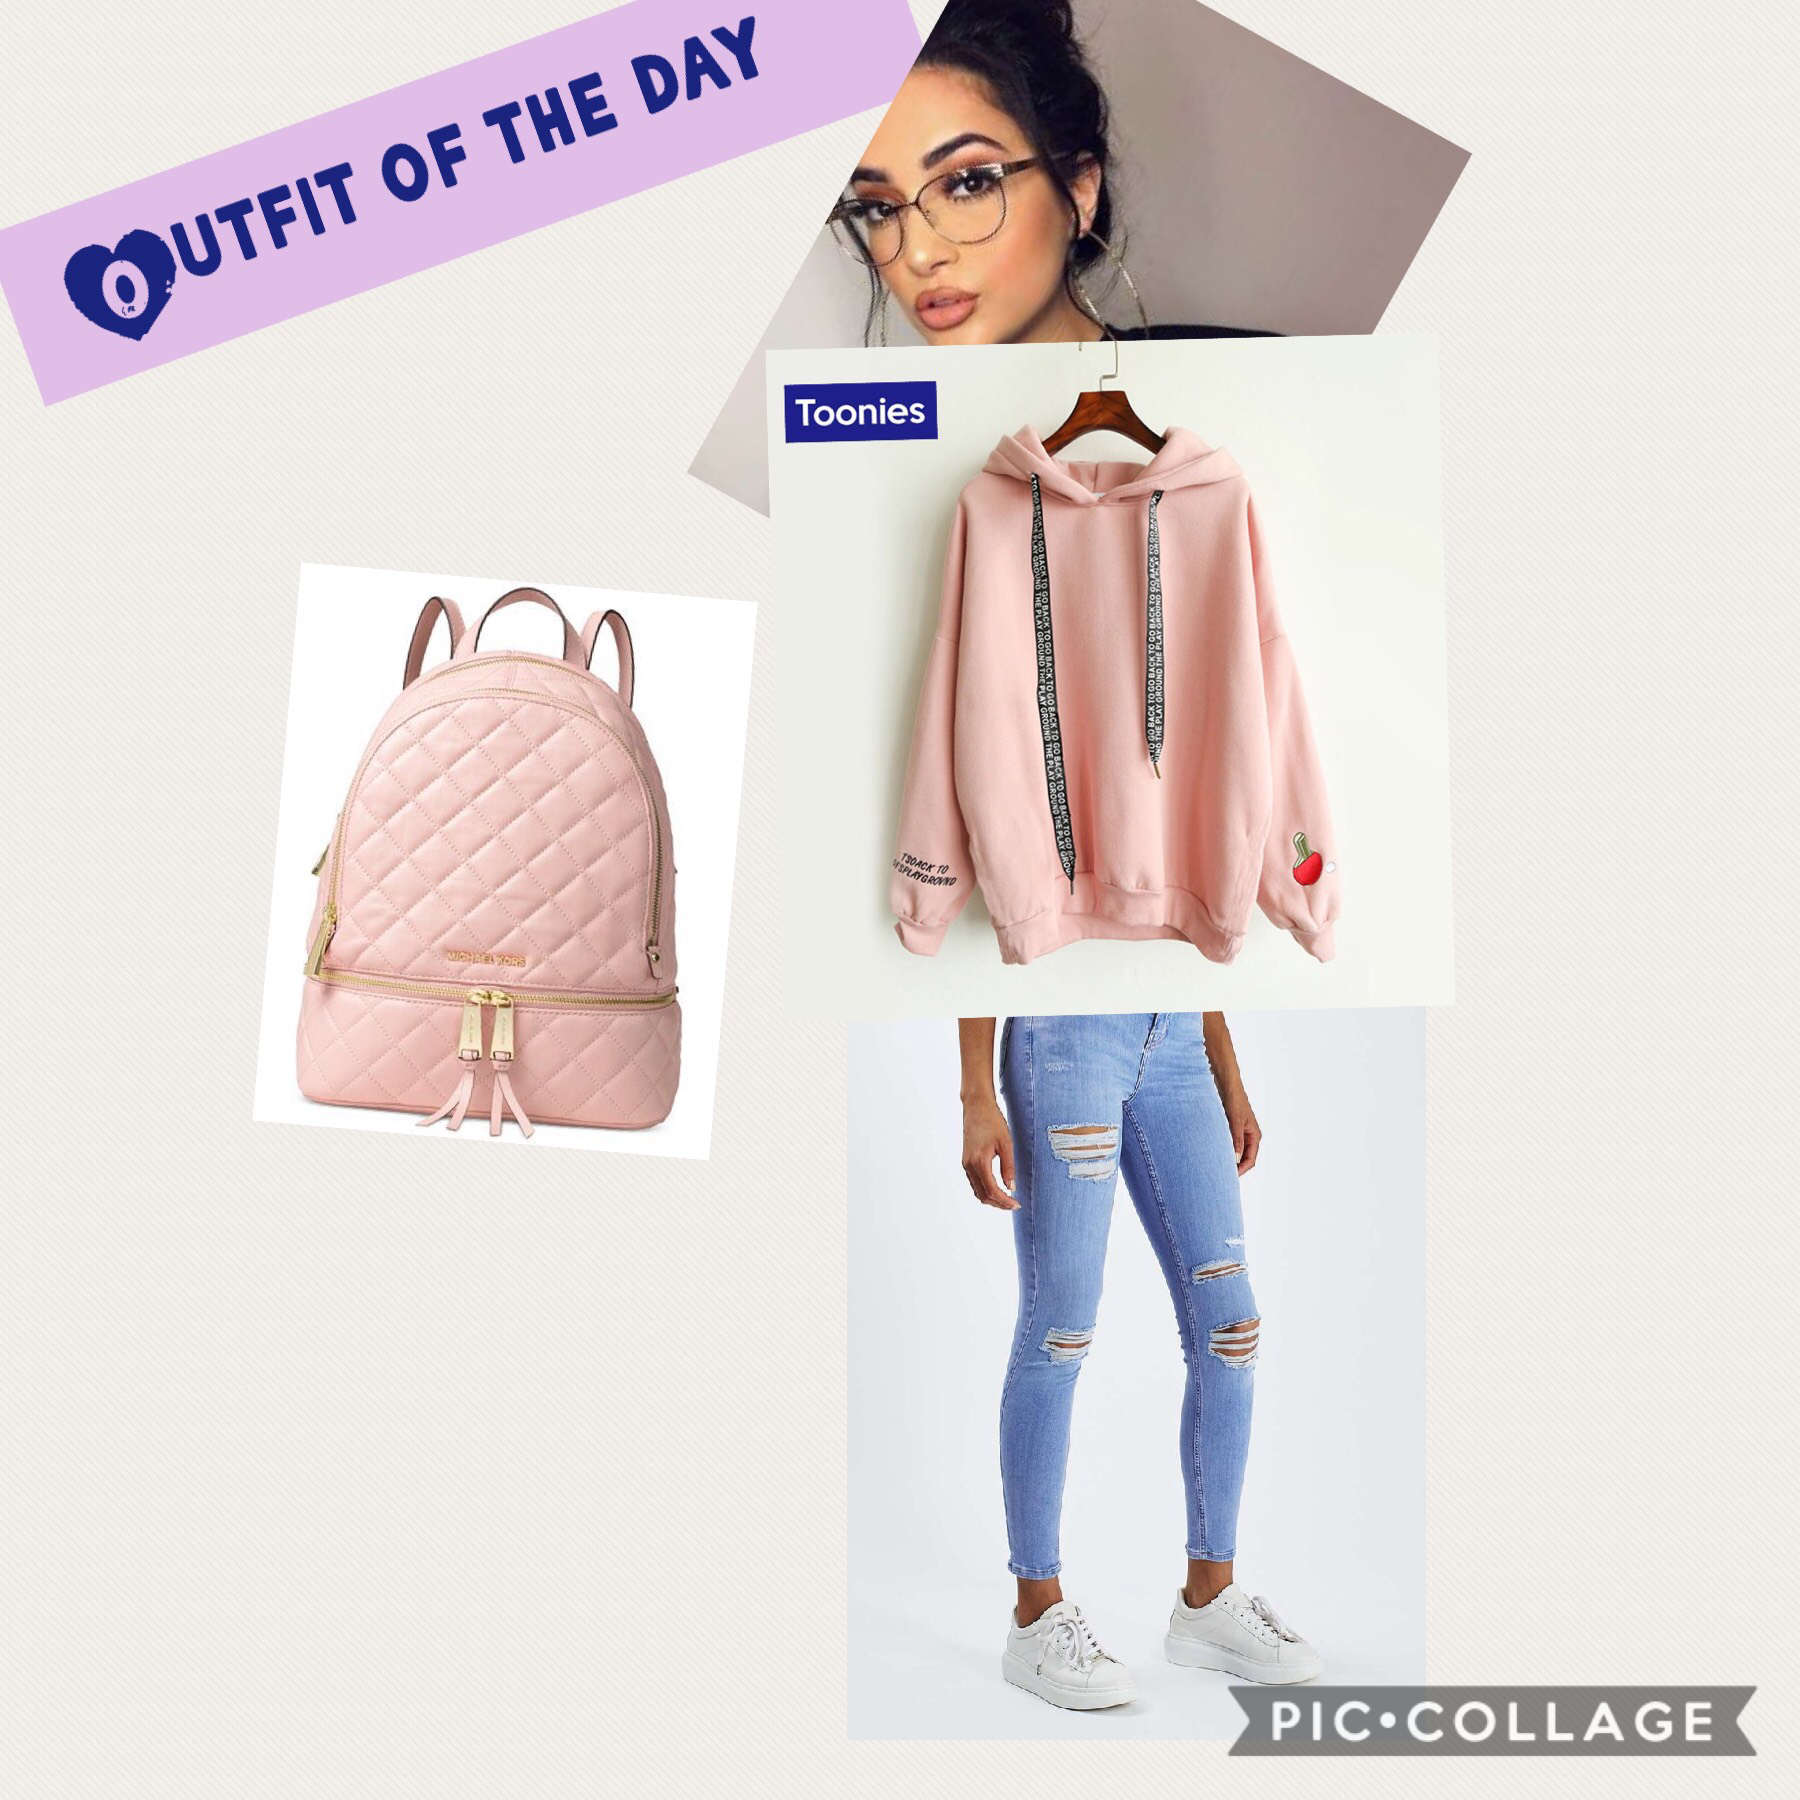 Cute outfit of the day